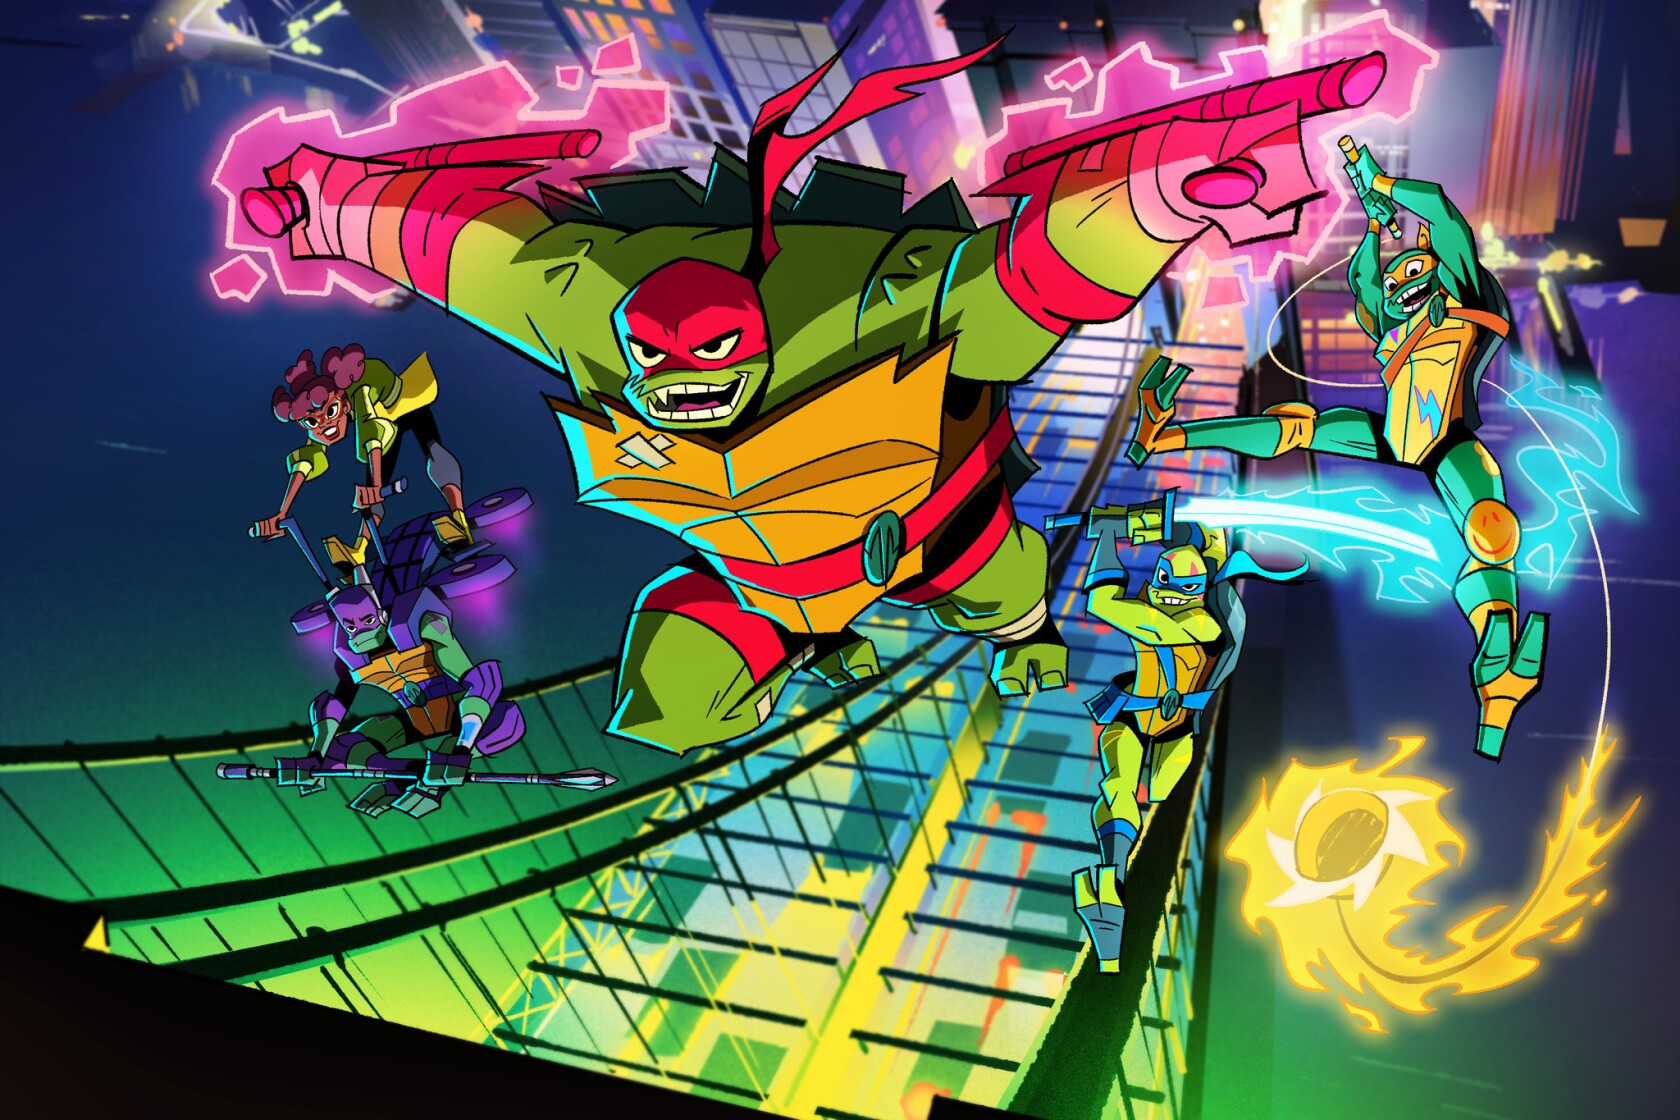 Get a first look at the new 'Rise of the Teenage Mutant Ninja Turtles